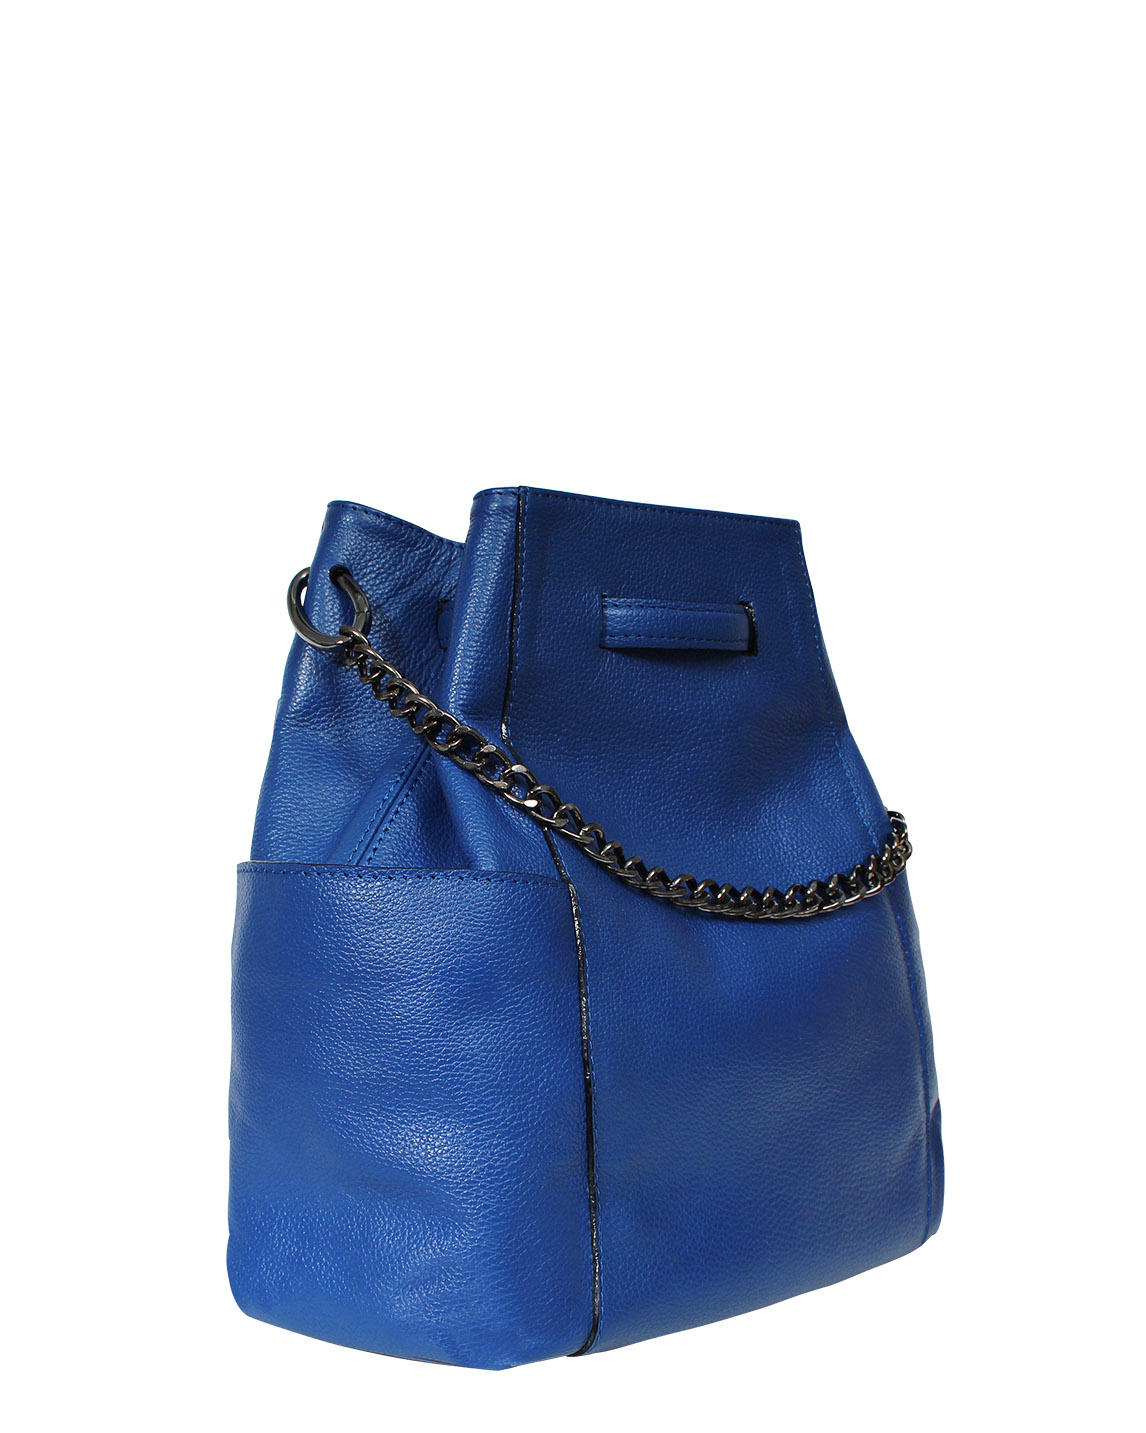 Cartera Backpack DS-3128 Color Azul